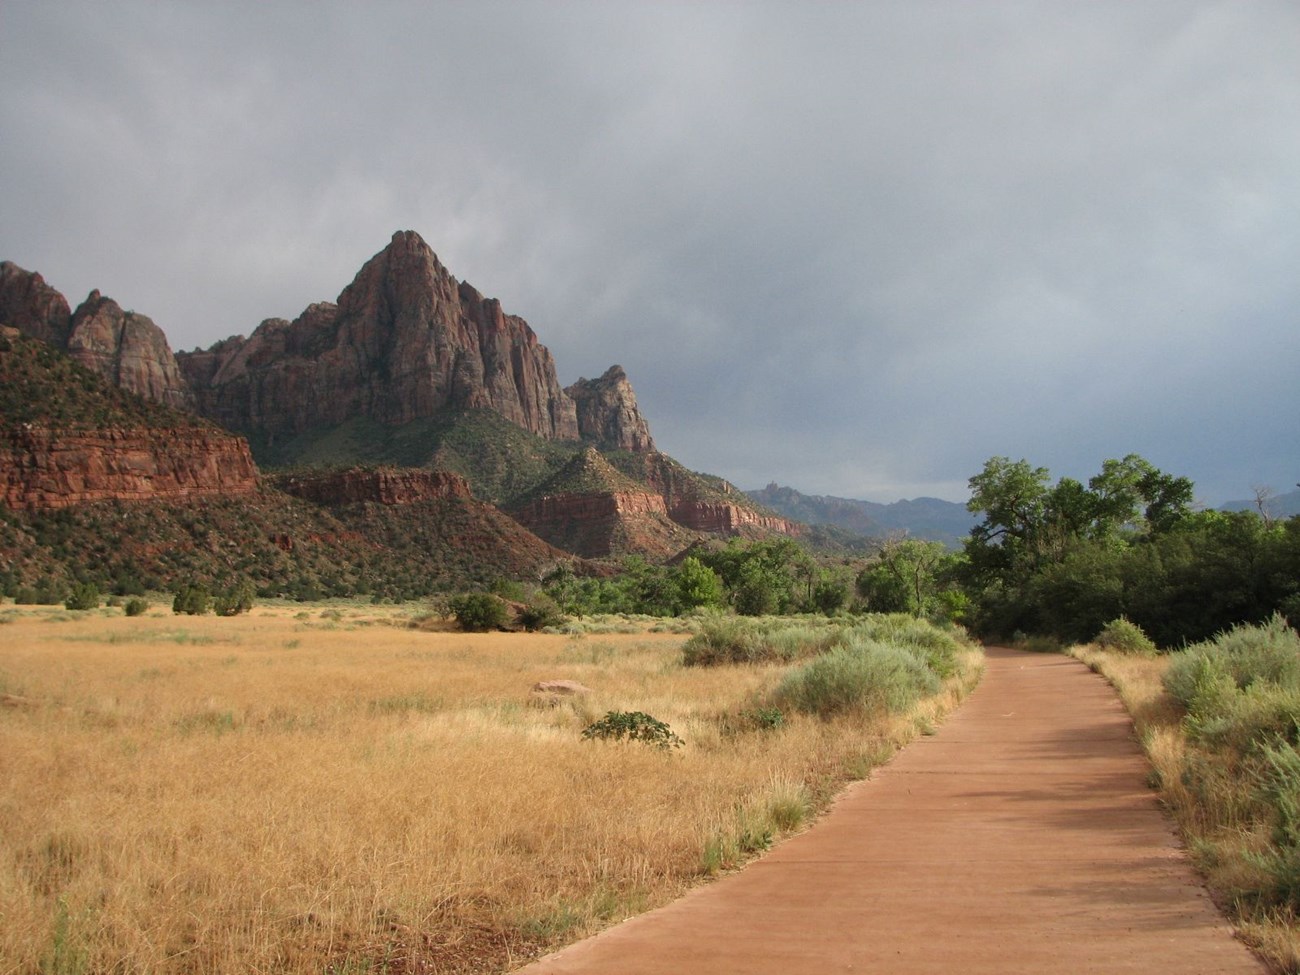 A paved path meanders through a desert scrubland. Watchman Tower, a 3,000 foot sandstone tower, is pictured in the background, with dark skies looming overhead